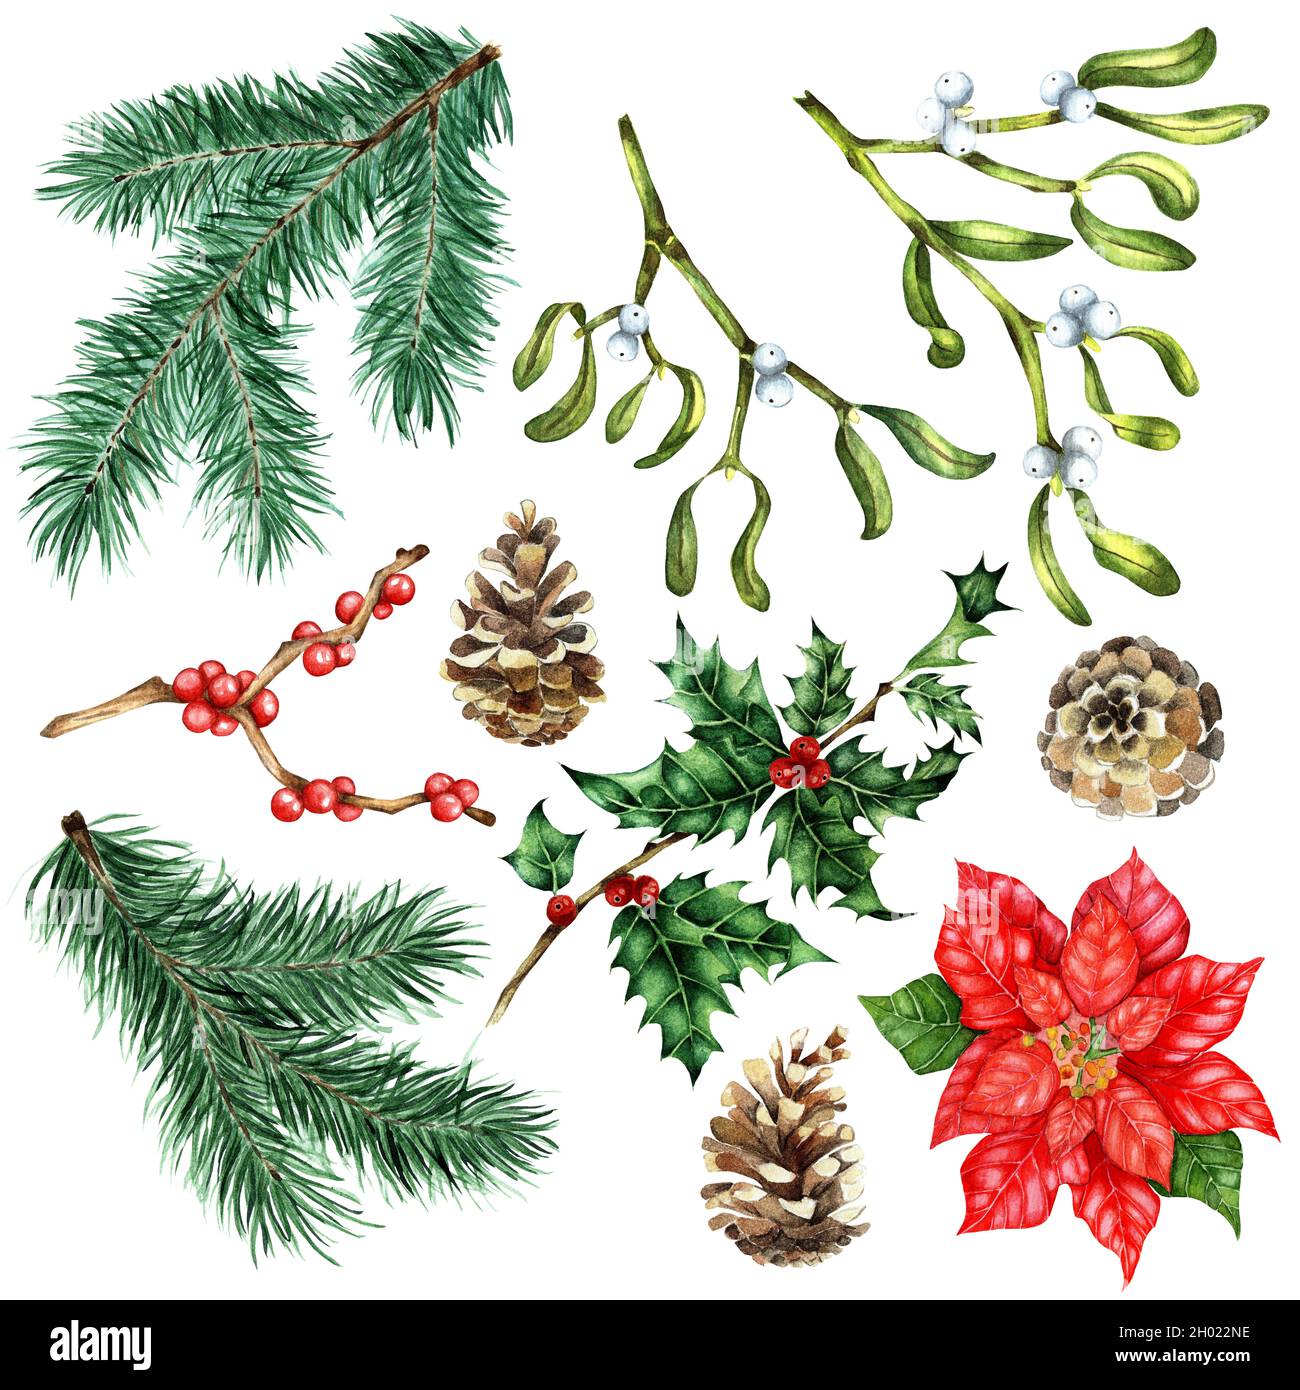 Set for Christmas and New Year. Watercolor Illustrations of Poinsettia, fir, pine branches, mistletoe branches, cones and Holly, Ilex. Isolated on whi Stock Photo